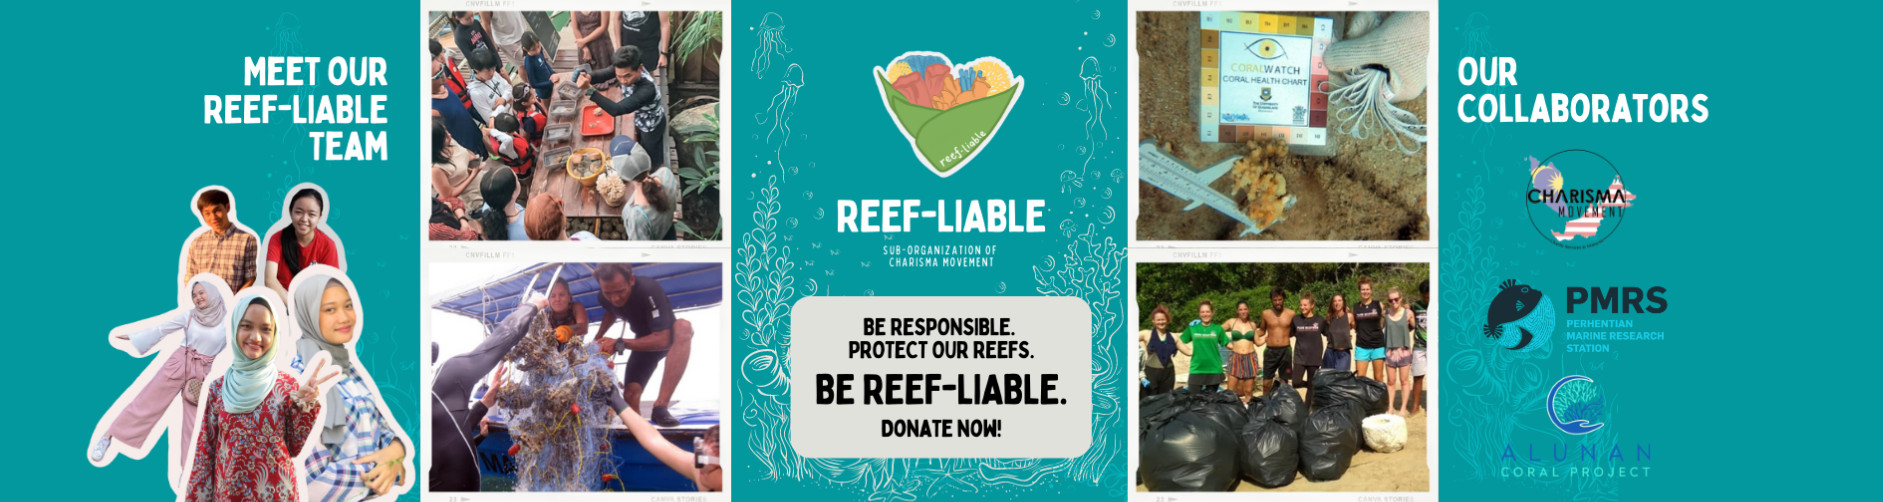 Save Our Reefs, Be Reef-liable!